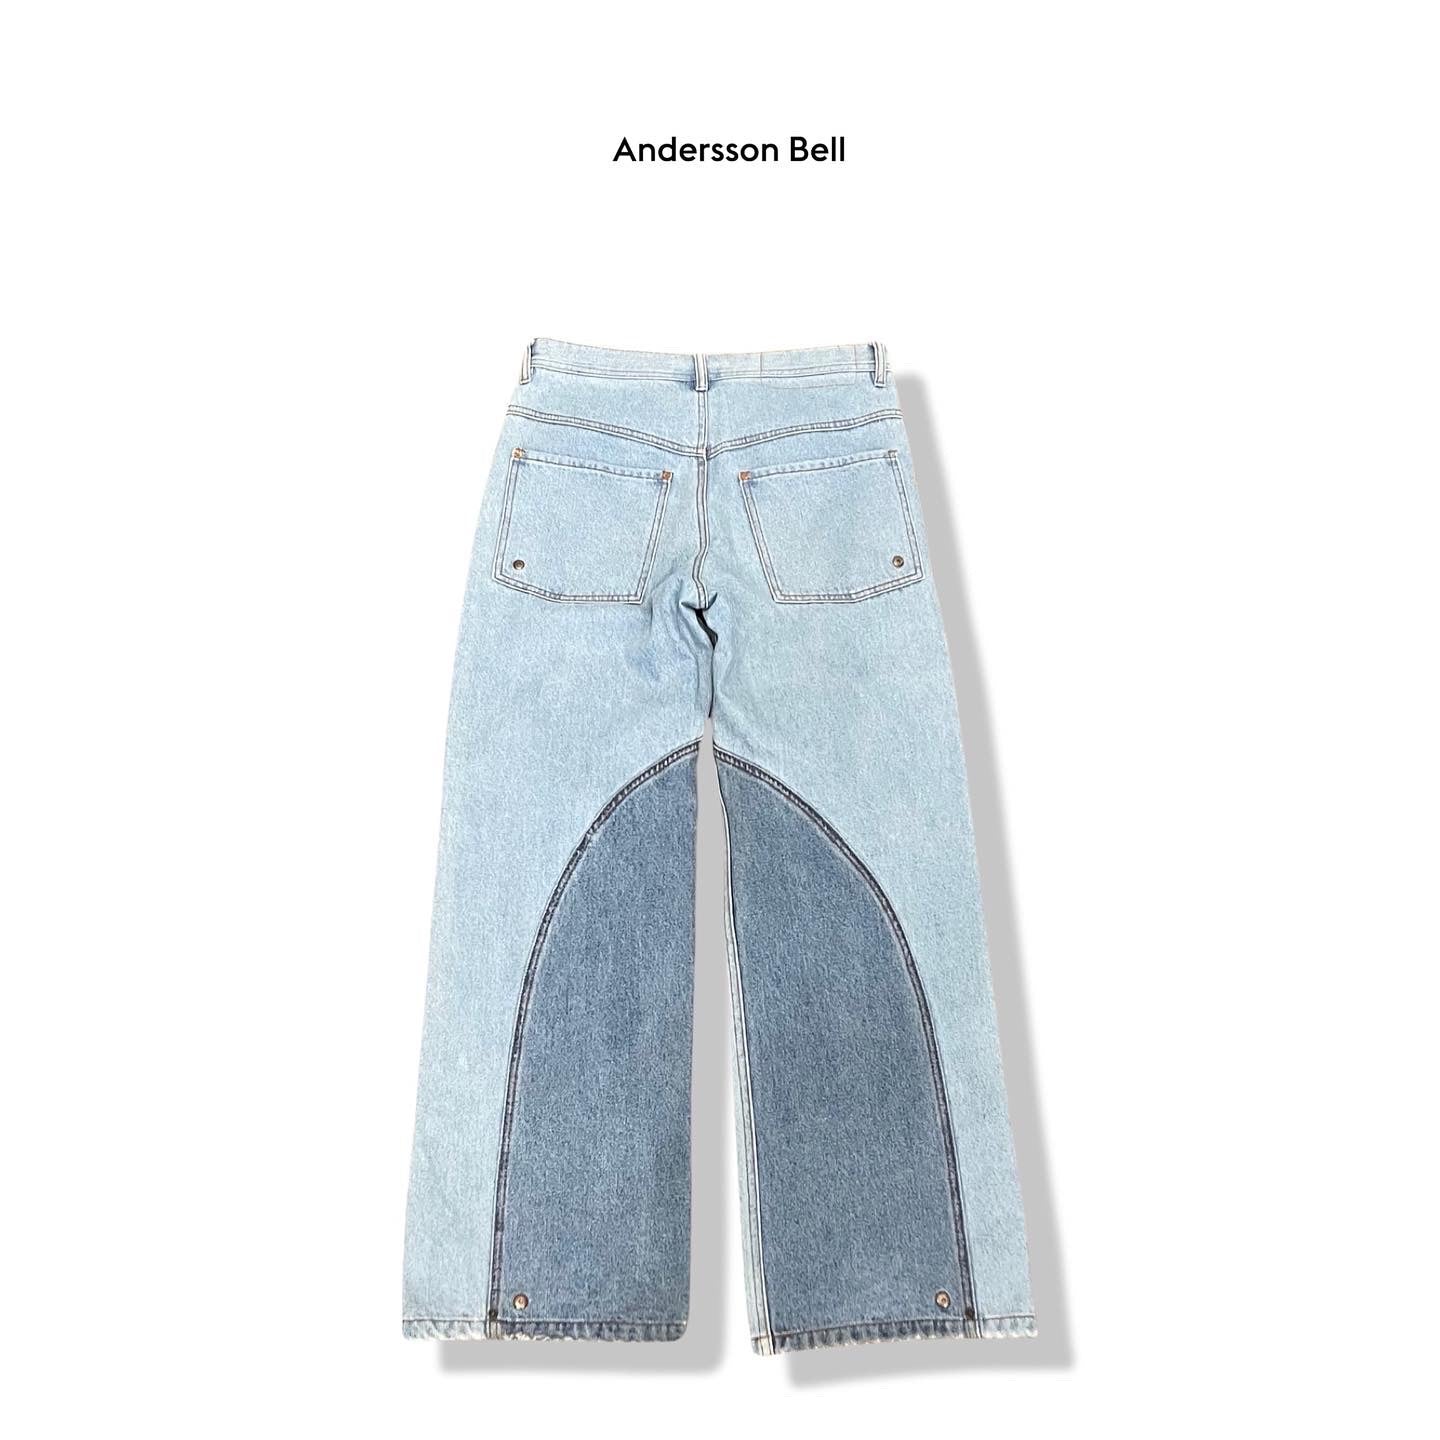 Andersson Bell jeans